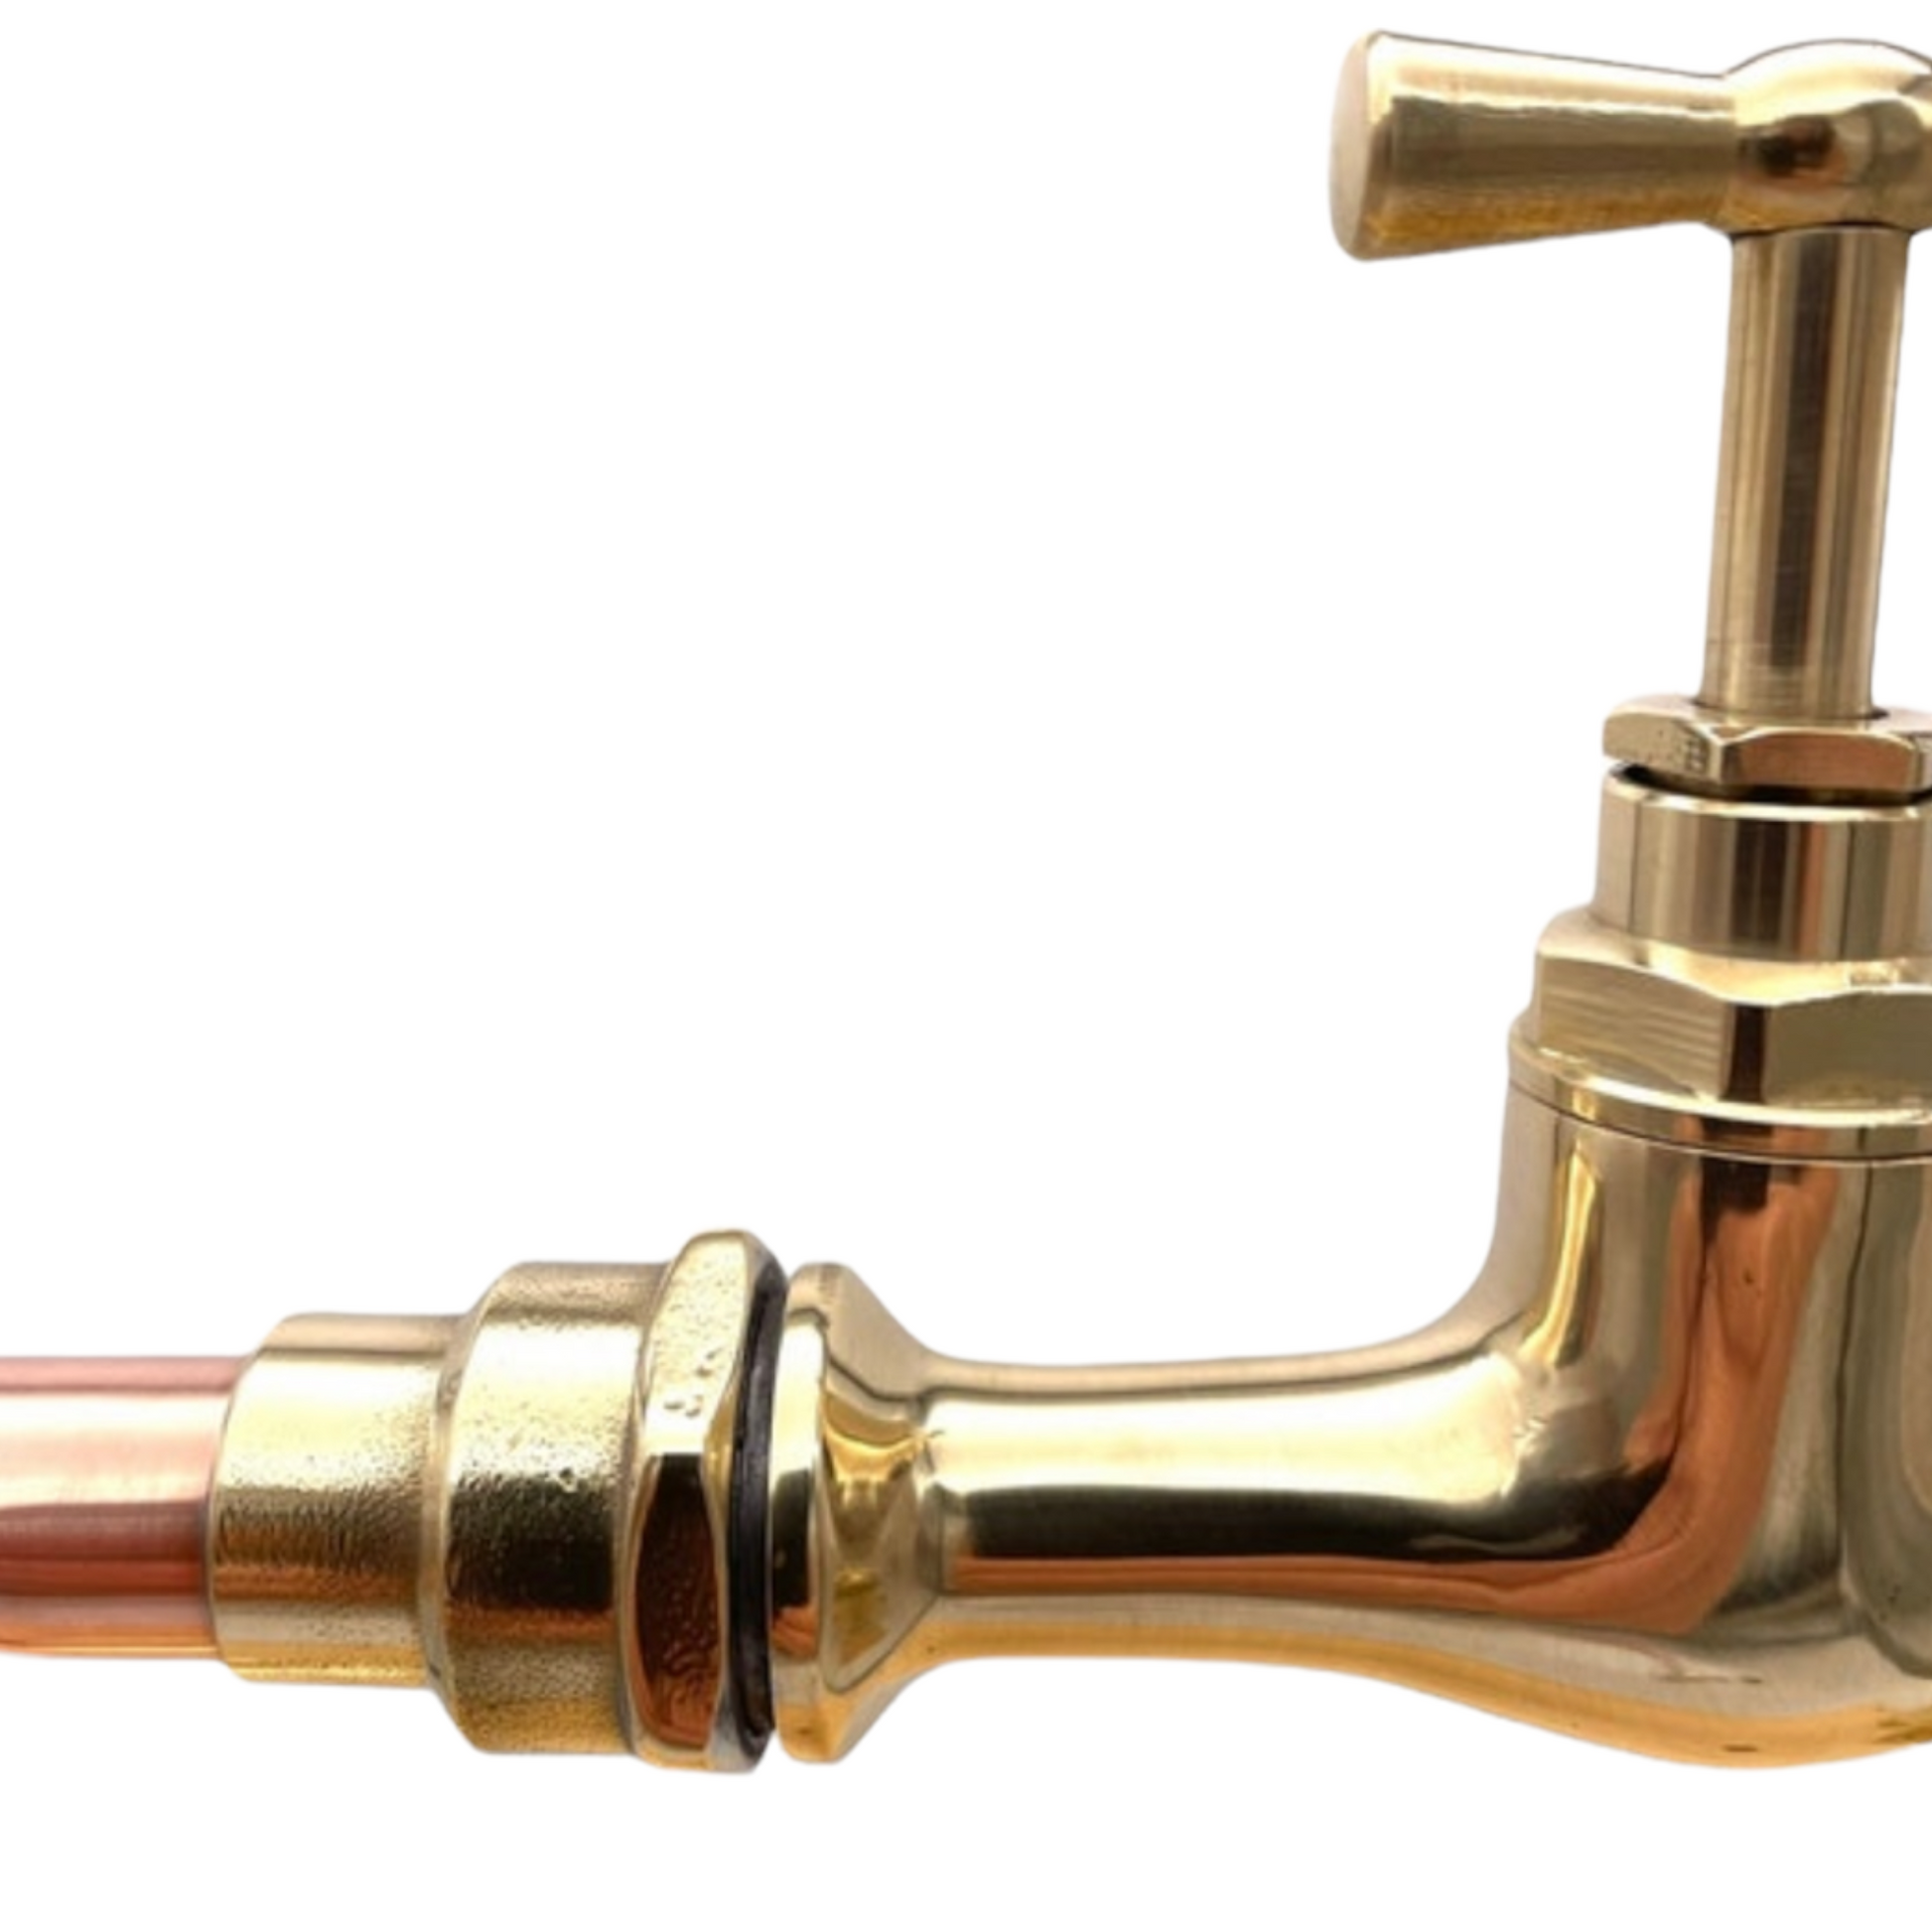 image of pair of copper and brass handmade taps close up